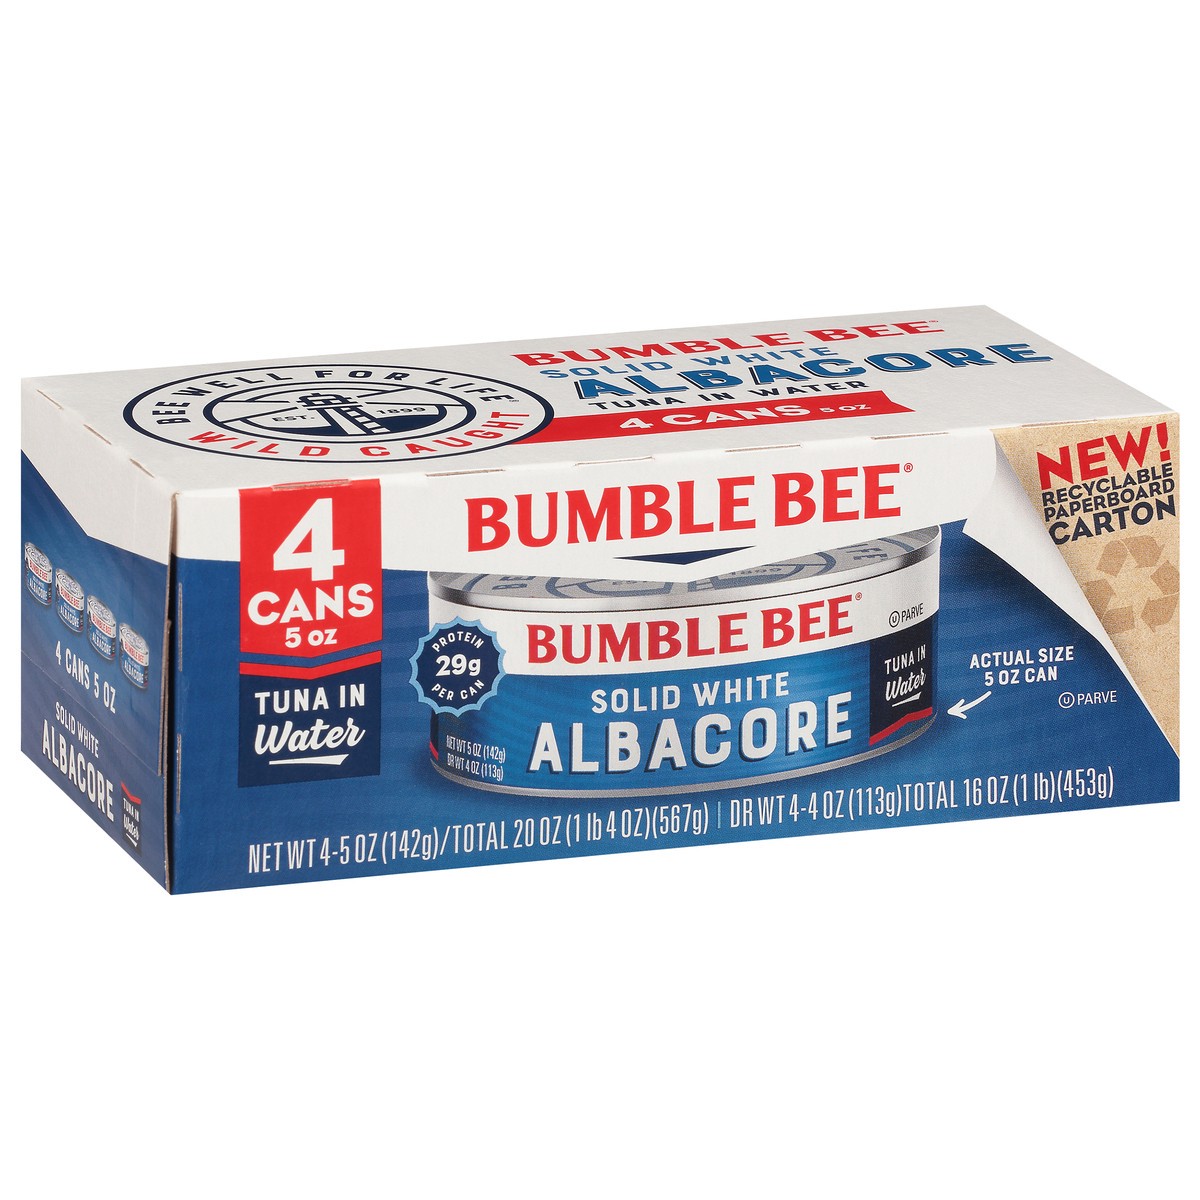 slide 9 of 9, Bumble Bee Solid White Albacore Tuna In Water 5oz 4 pack, 4 ct